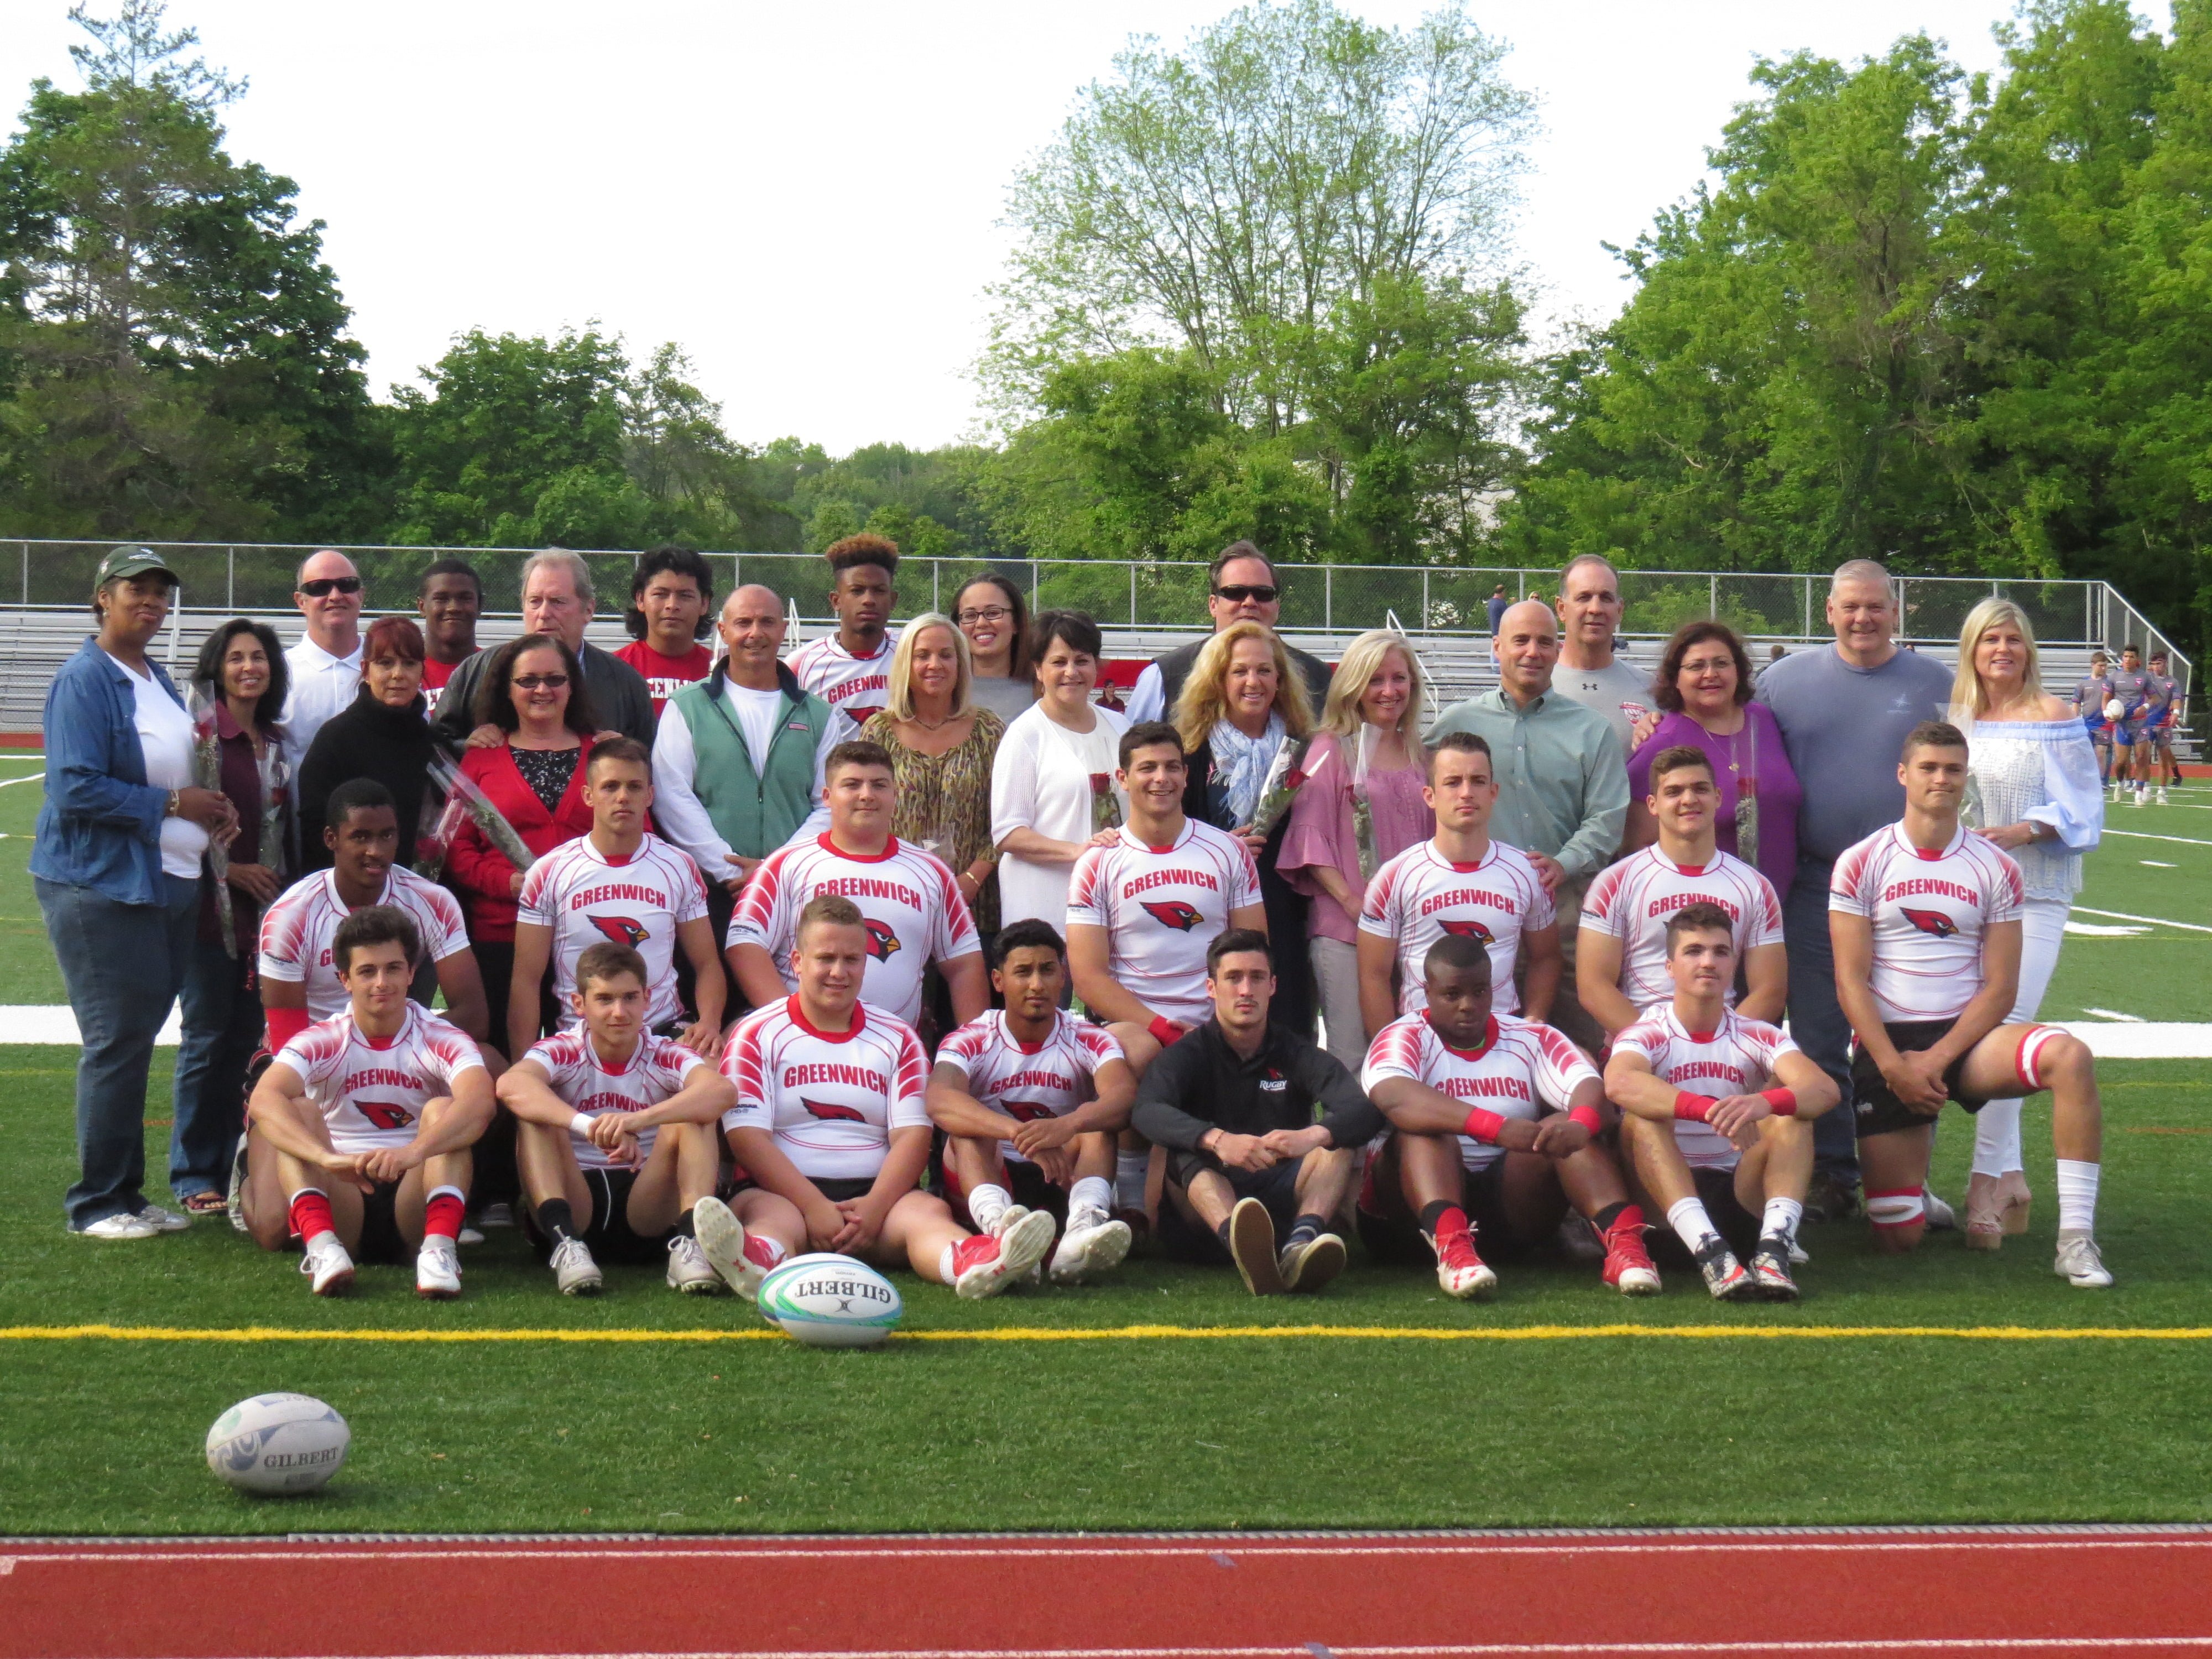 GHS Rugby senior players pose for a photo with their families. May 24, 2017. Photo: Devon Bedoya